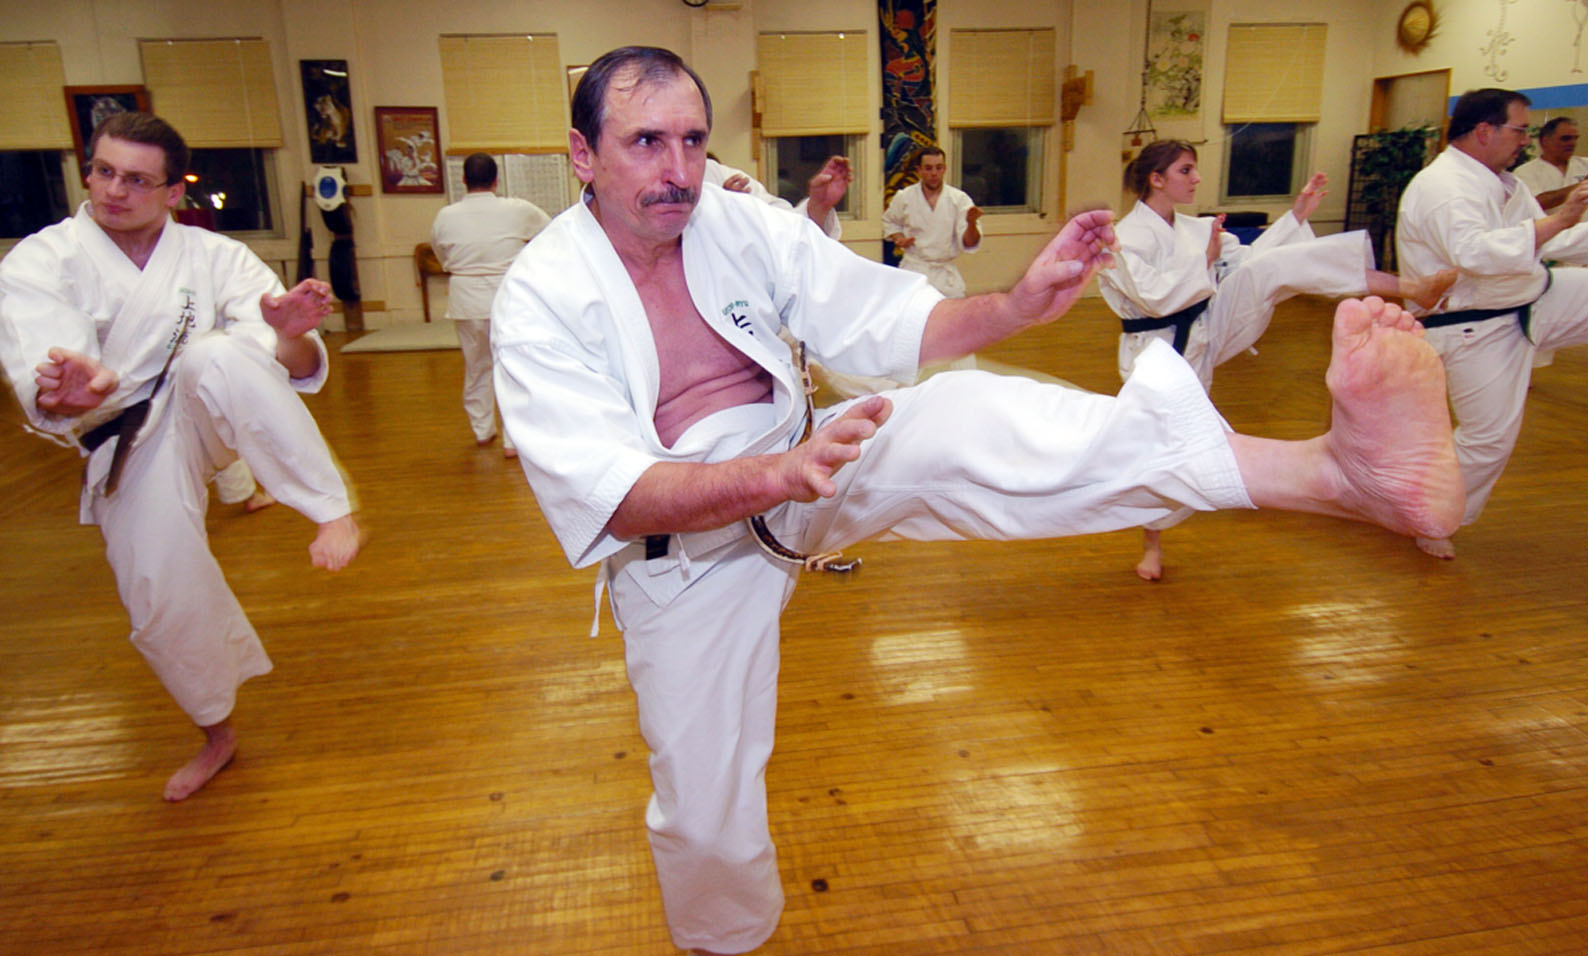 Amsterdam karate instructor pushes students